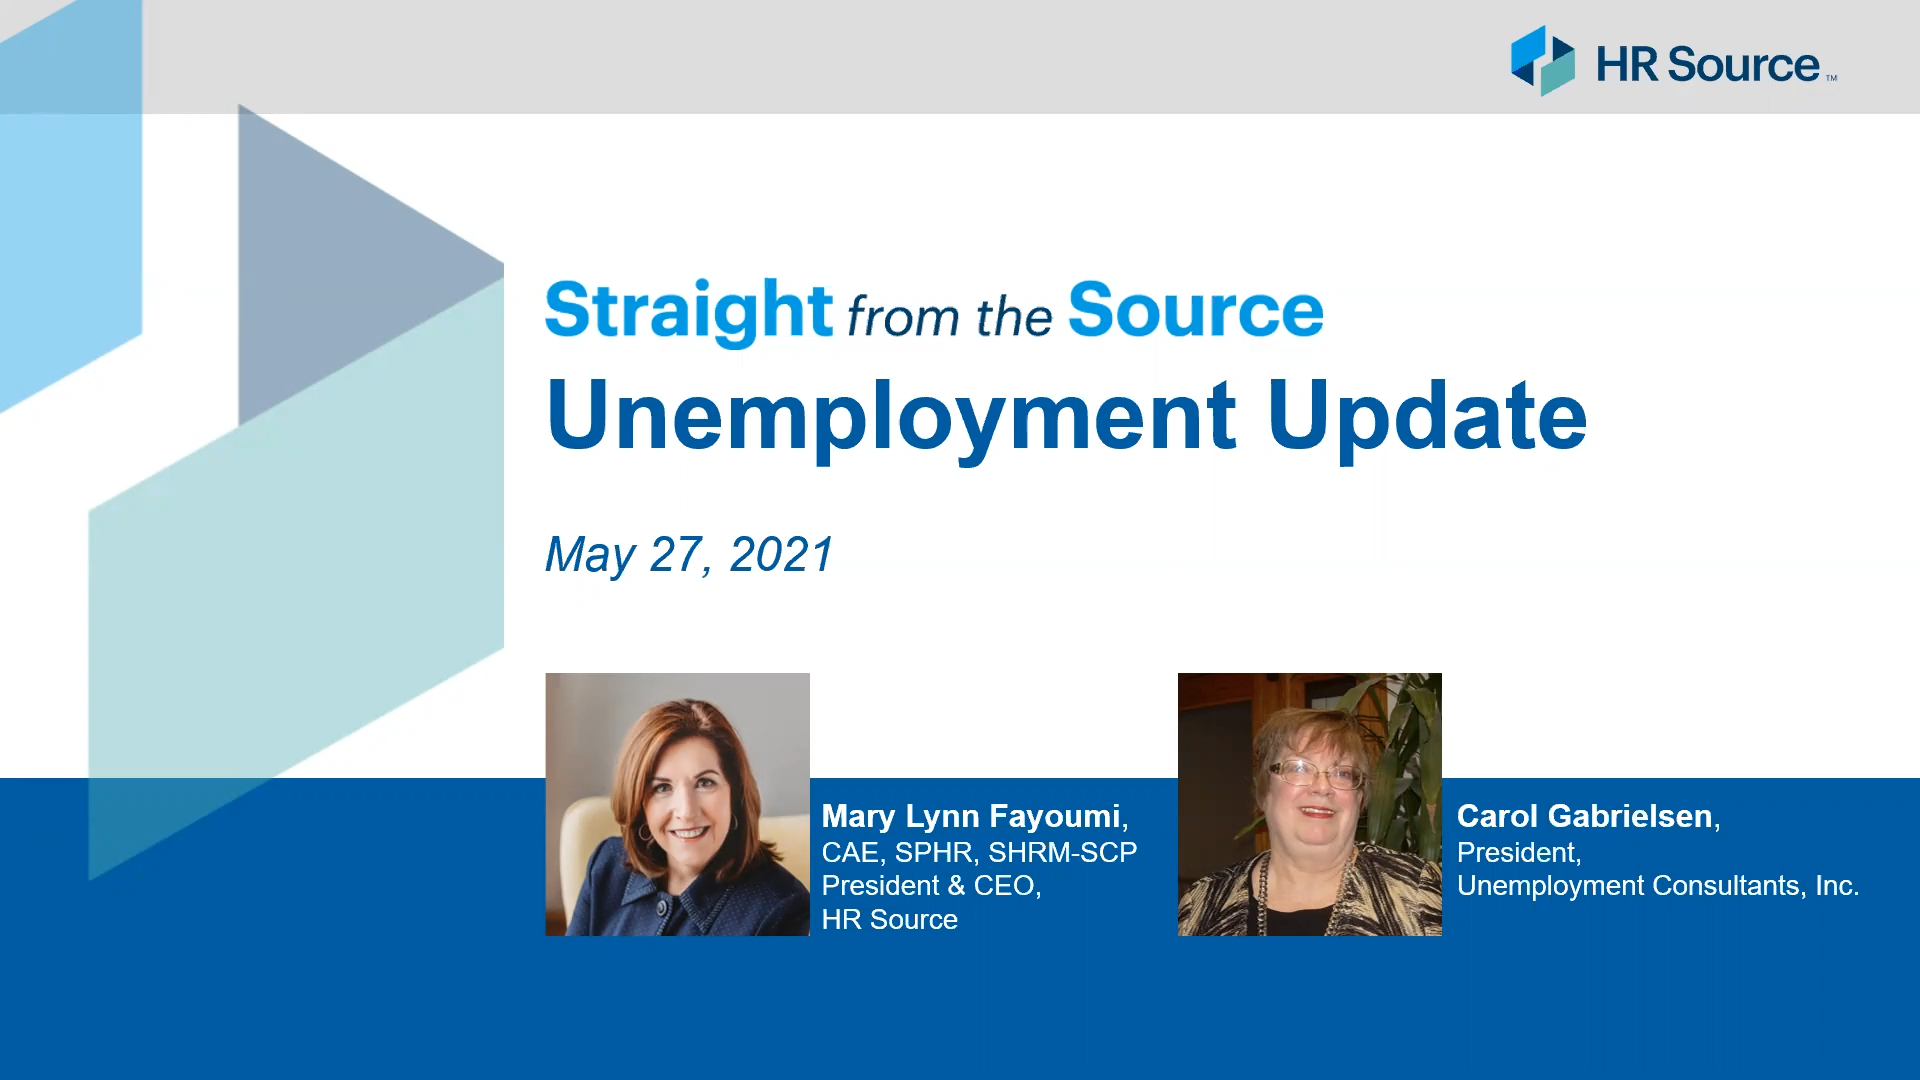 Straight from the Source: Unemployment Update